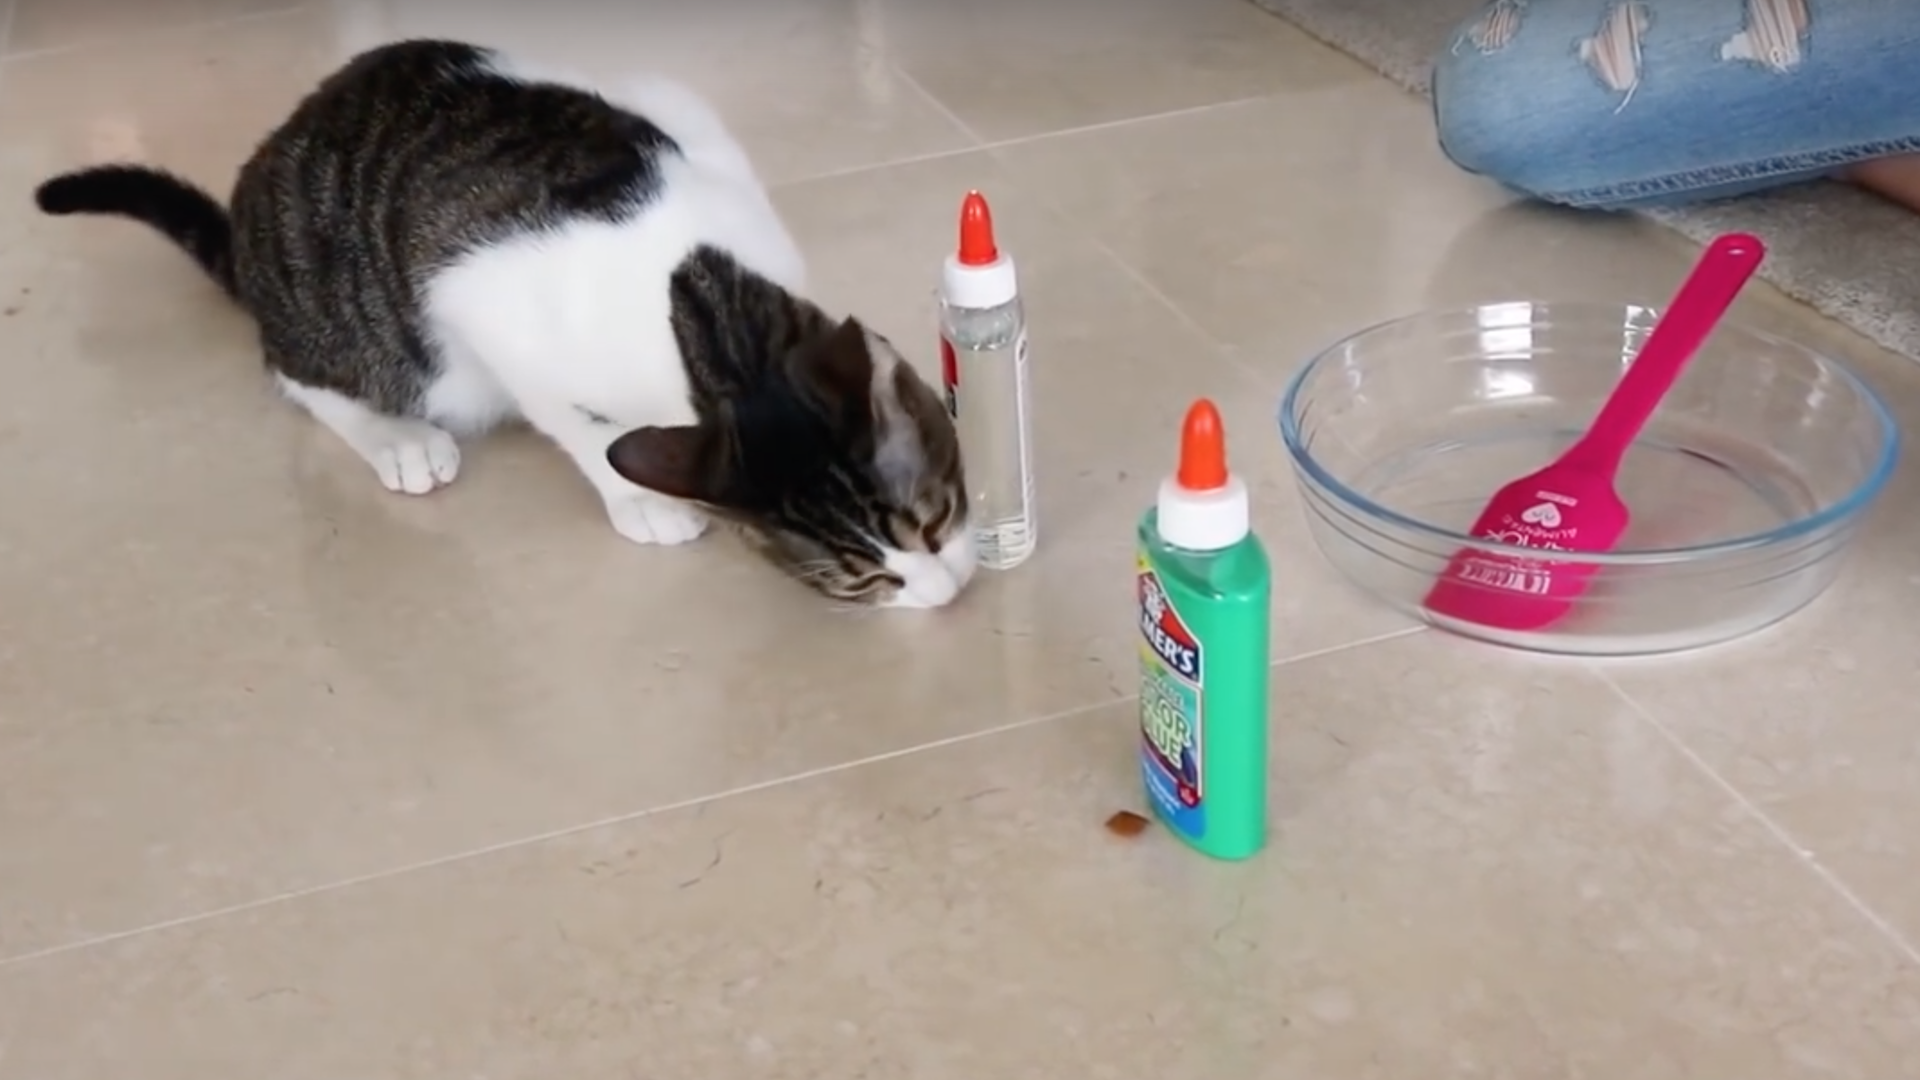 A cat looks at some glue 